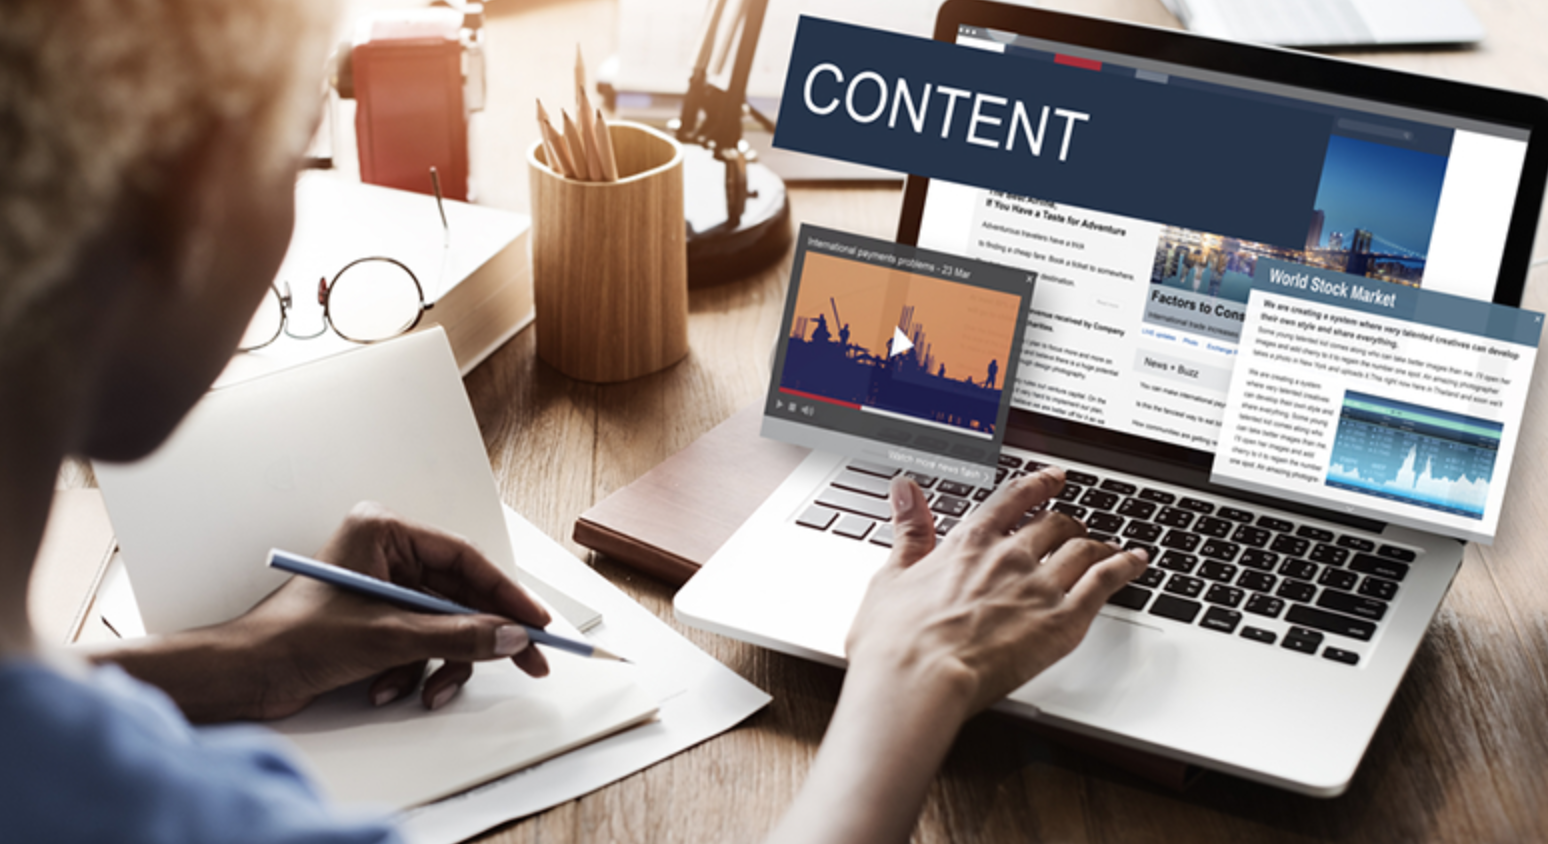 website content tips by Web Finance Team